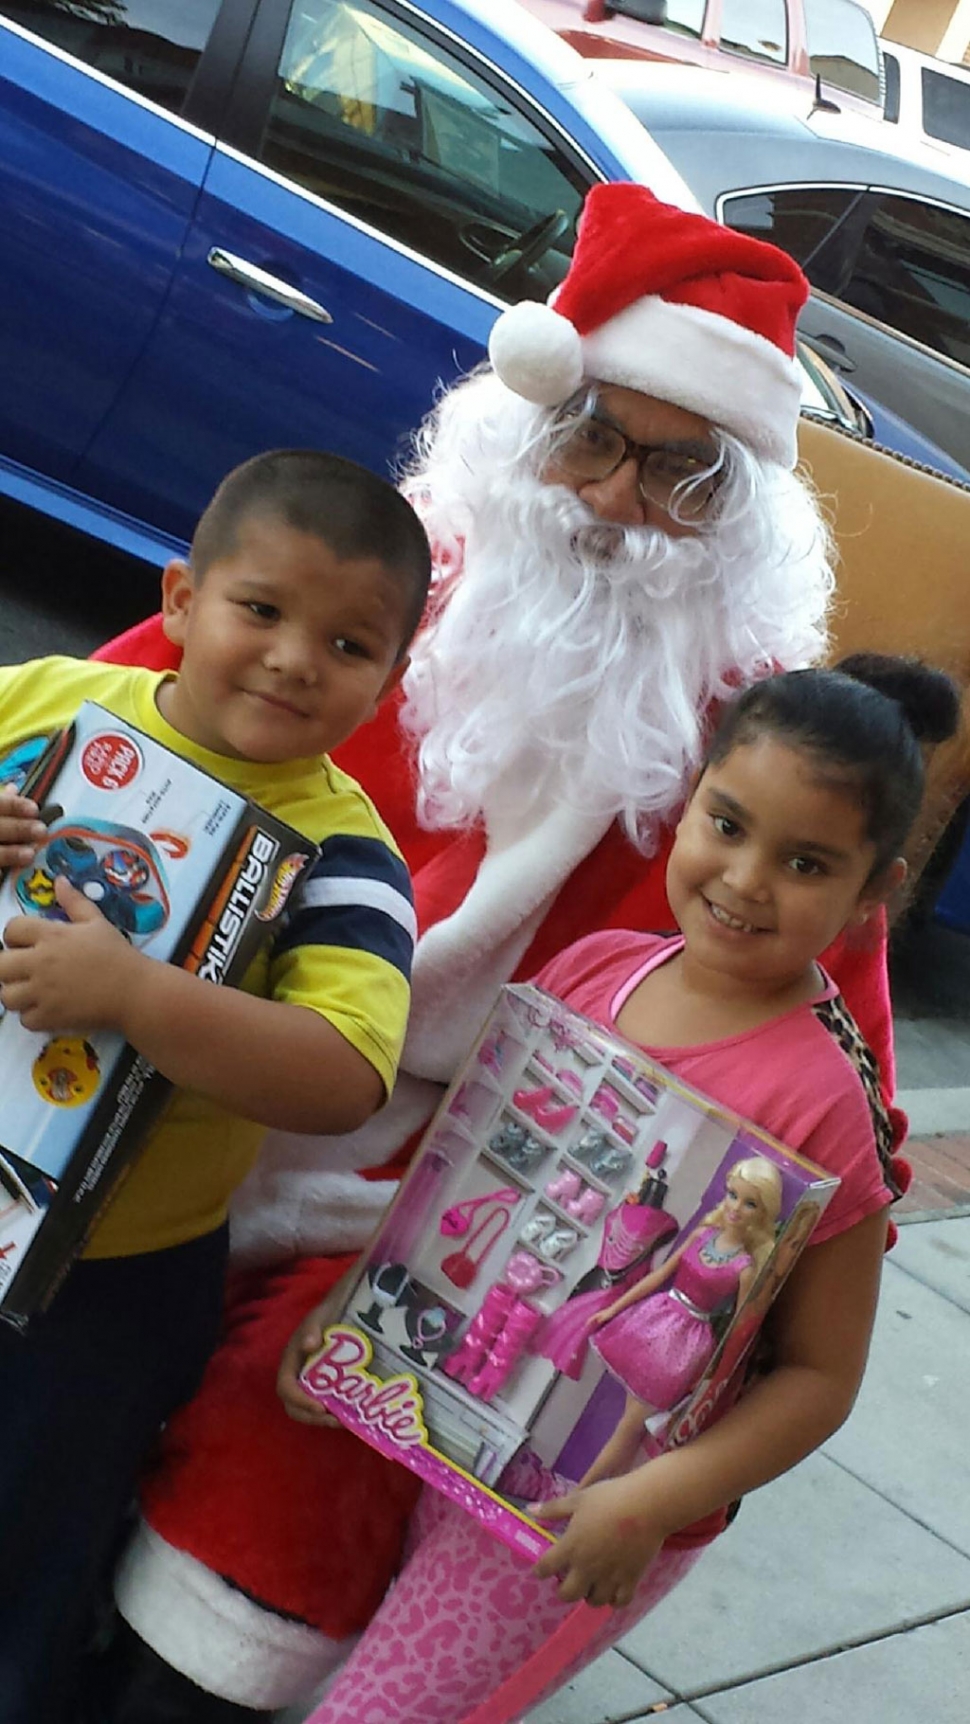 Santa really gets around! He visited the Clinicas on Central Avenue. Siblings Junior and Maria were happy to see him in town.